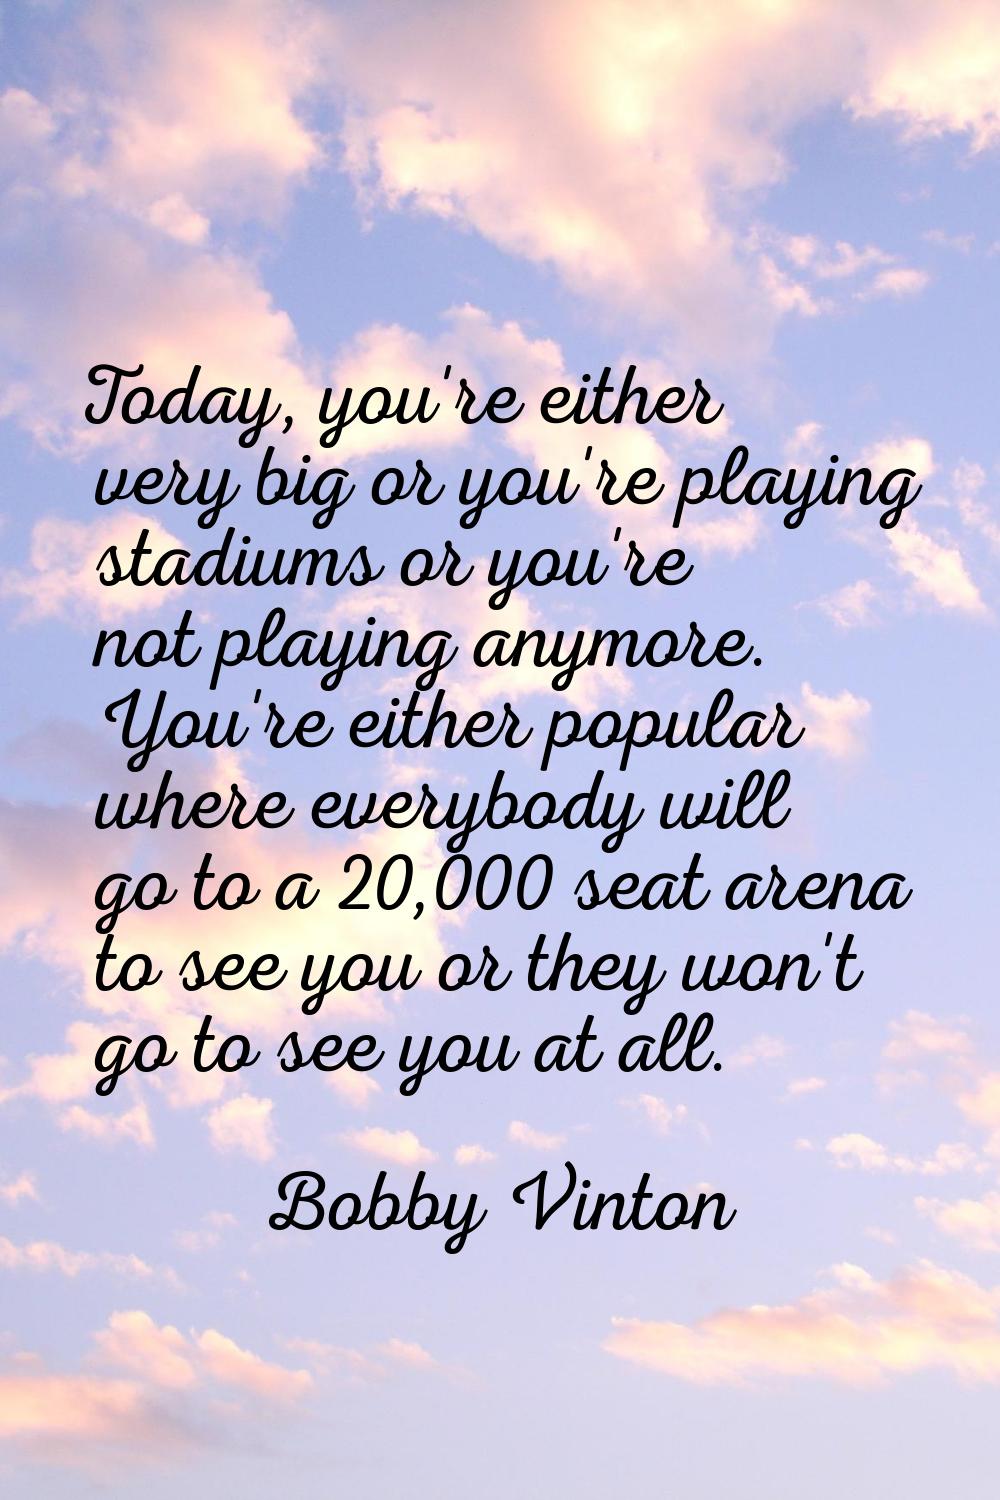 Today, you're either very big or you're playing stadiums or you're not playing anymore. You're eith